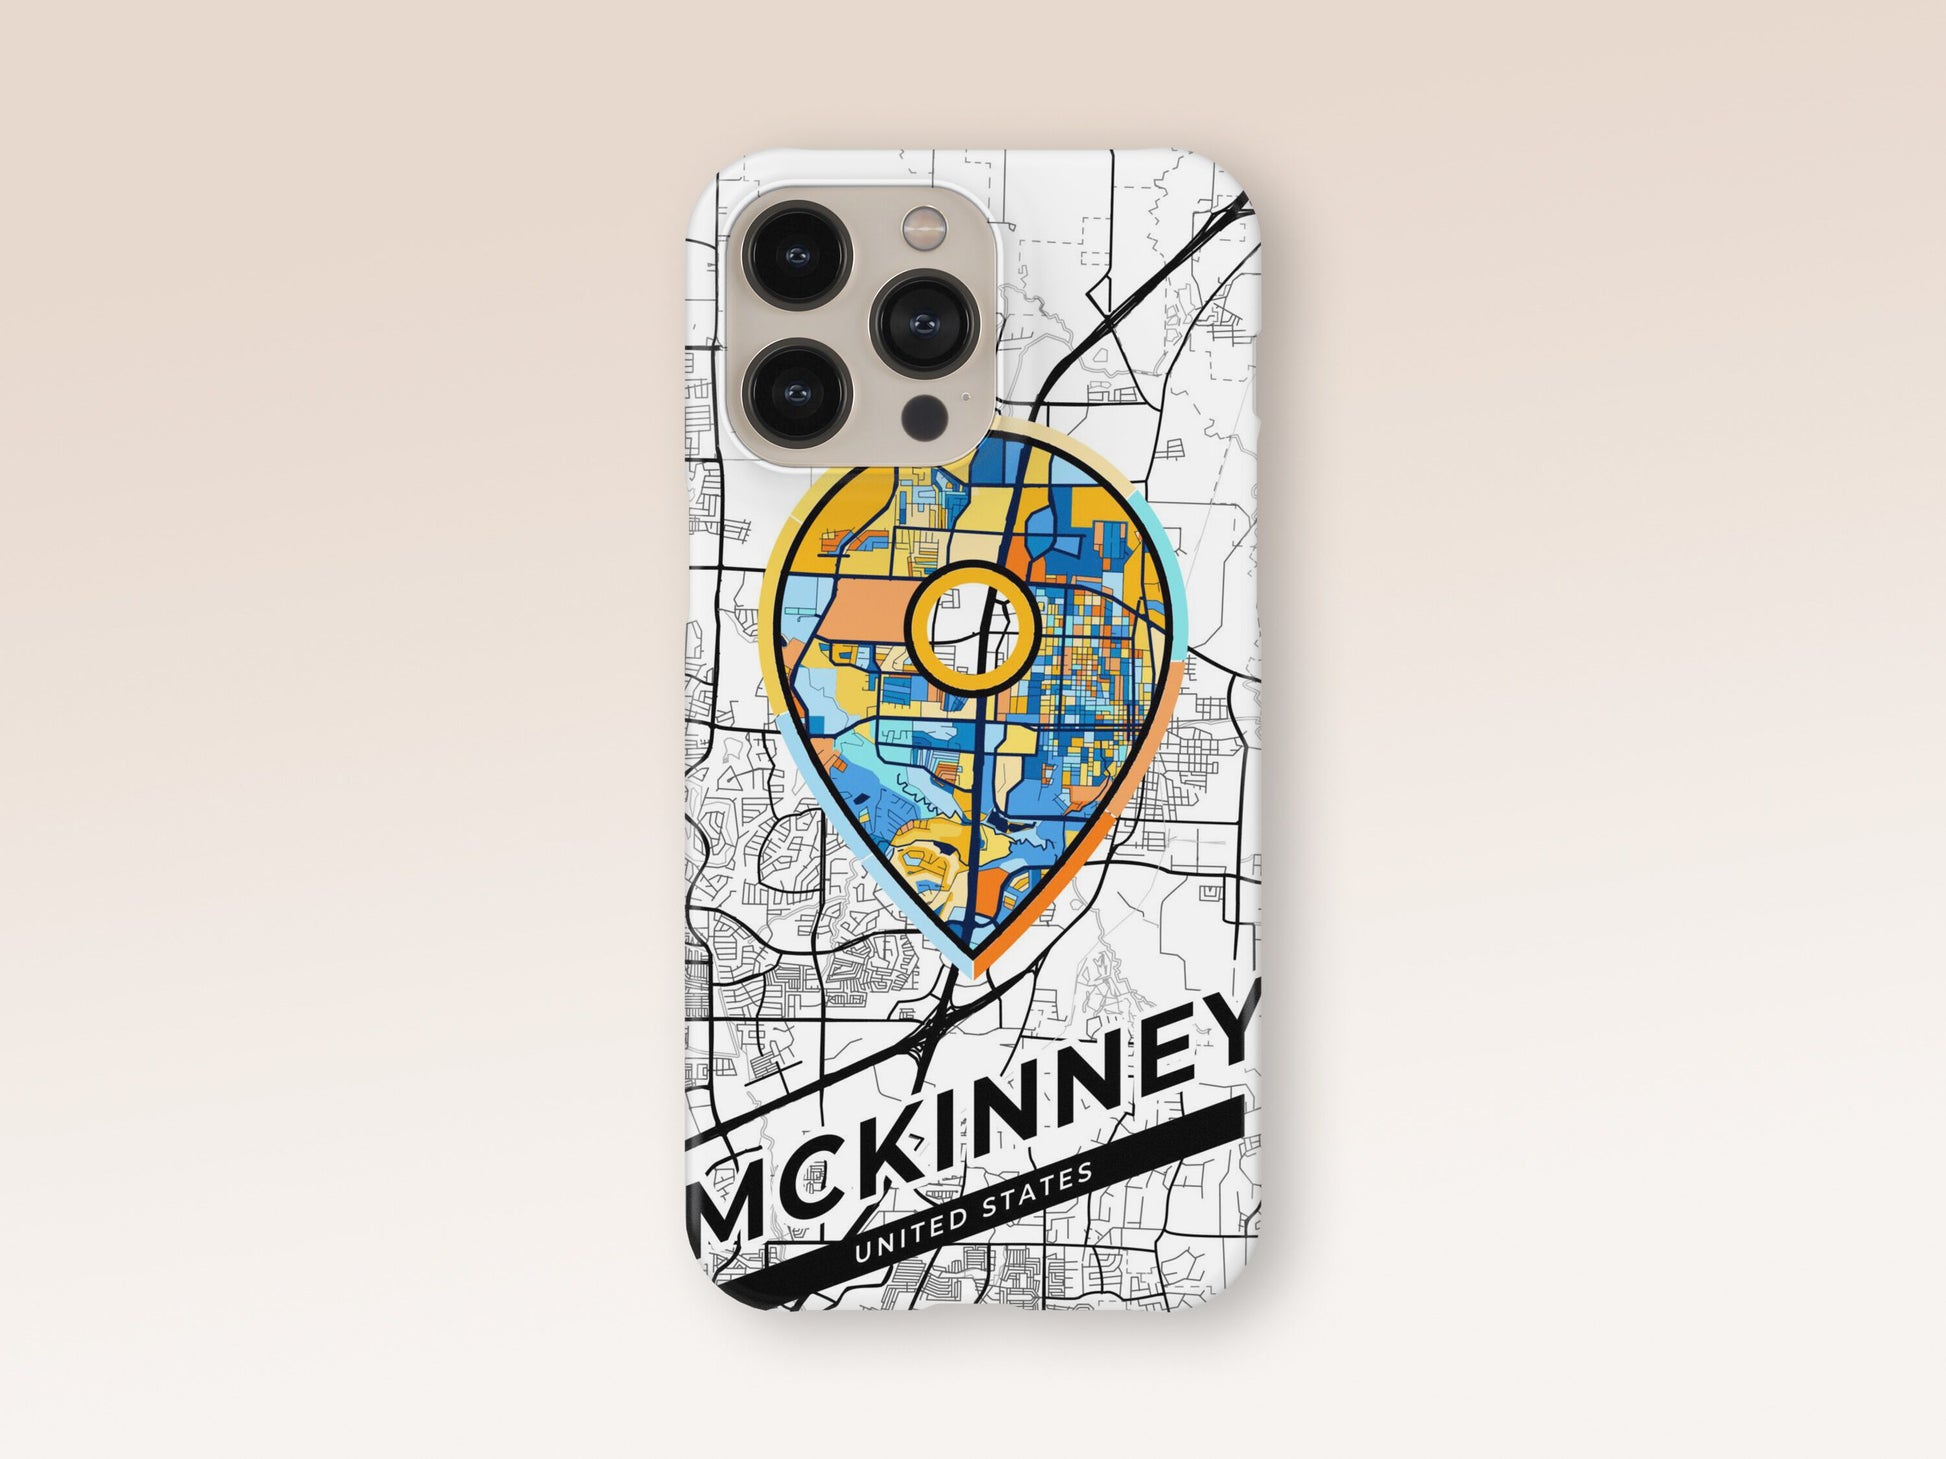 Mckinney Texas slim phone case with colorful icon. Birthday, wedding or housewarming gift. Couple match cases. 1